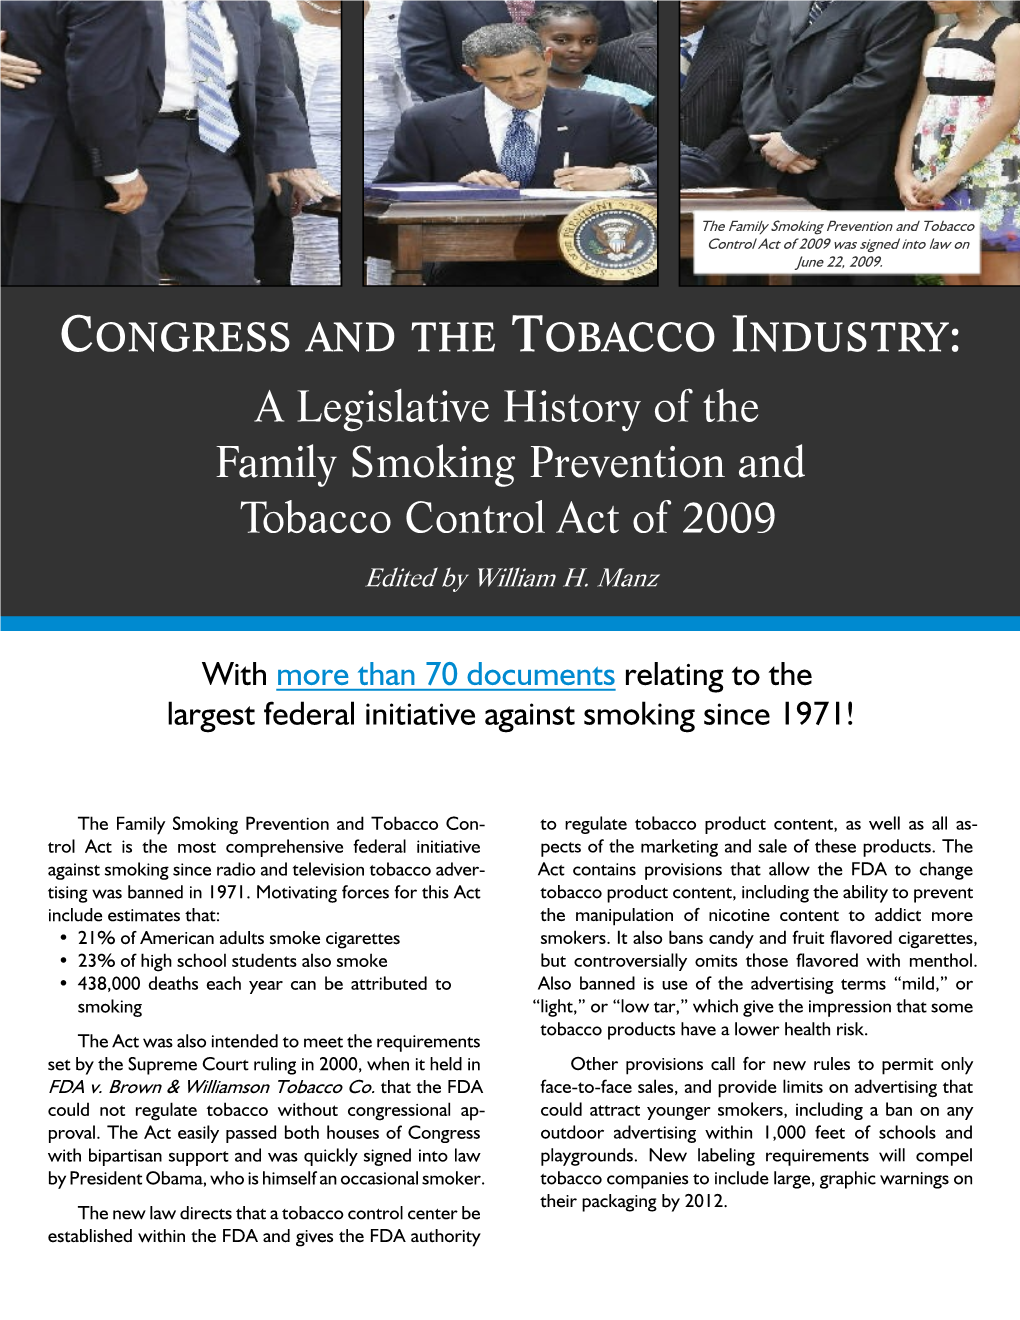 A Legislative History of the Family Smoking Prevention and Tobacco Control Act of 2009